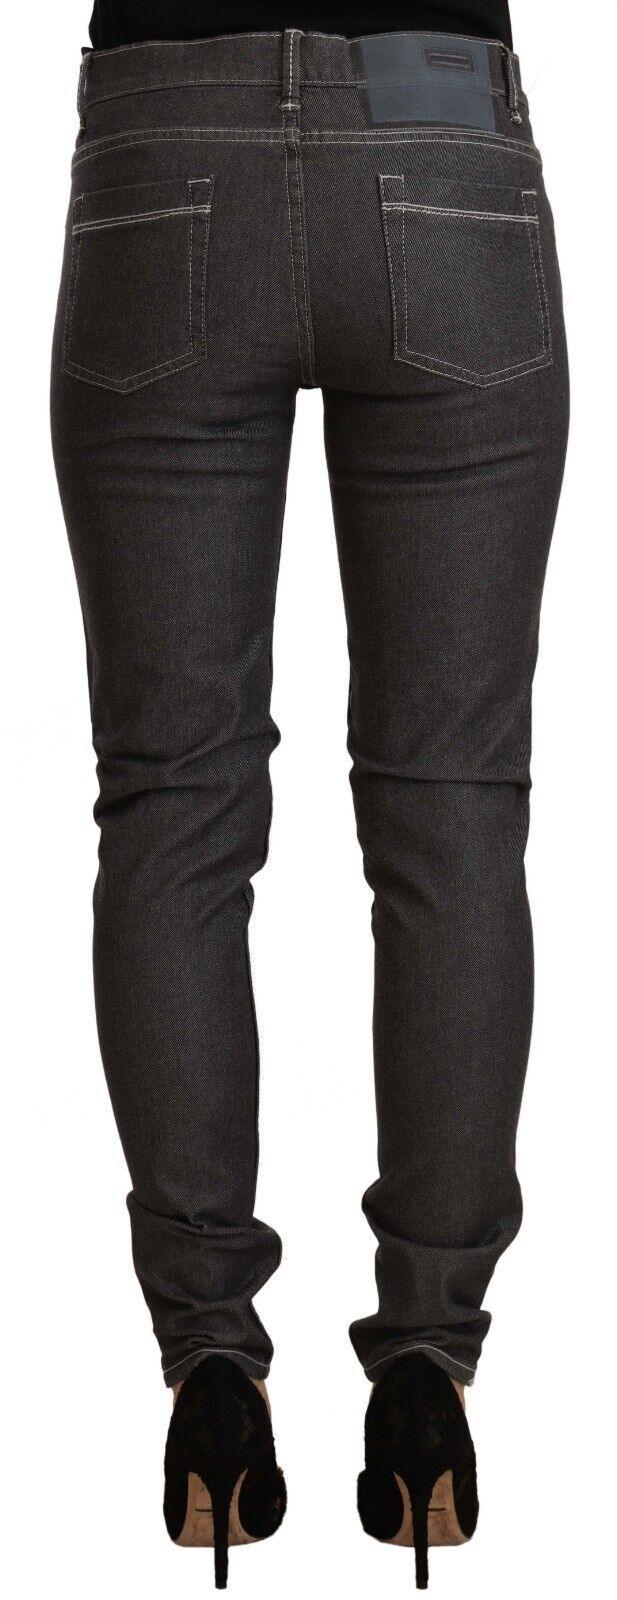 Acht Women's Black Low Waist Skinny Denim Slim Fit Jeans - Designed by Acht Available to Buy at a Discounted Price on Moon Behind The Hill Online Designer Discount Store